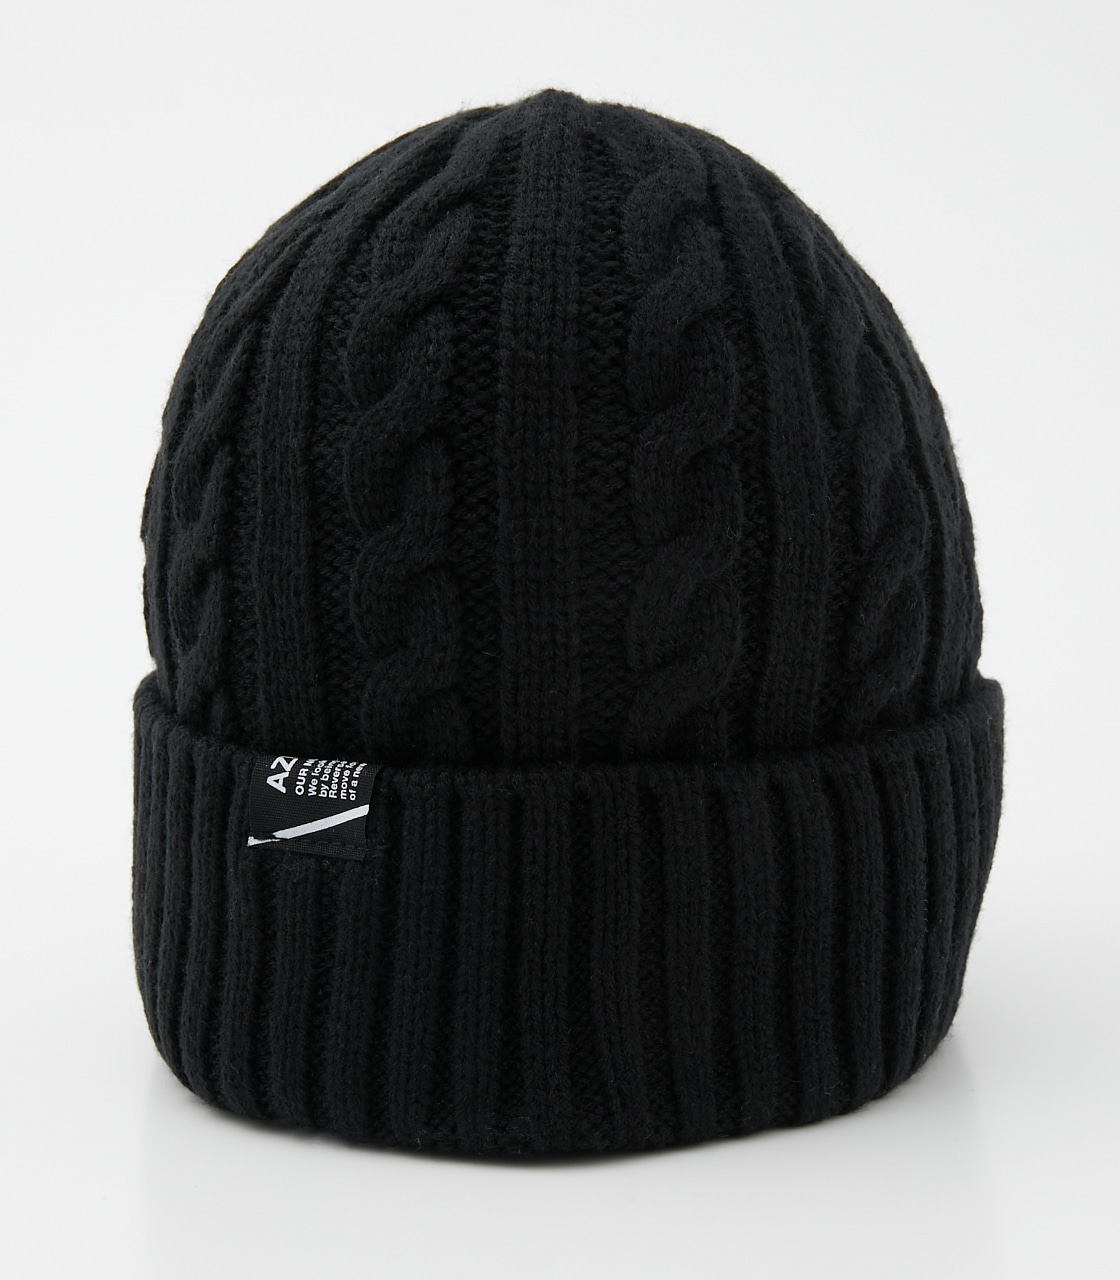 CABLE KNIT CAP/ケーブルニットキャップ 詳細画像 BLK 3